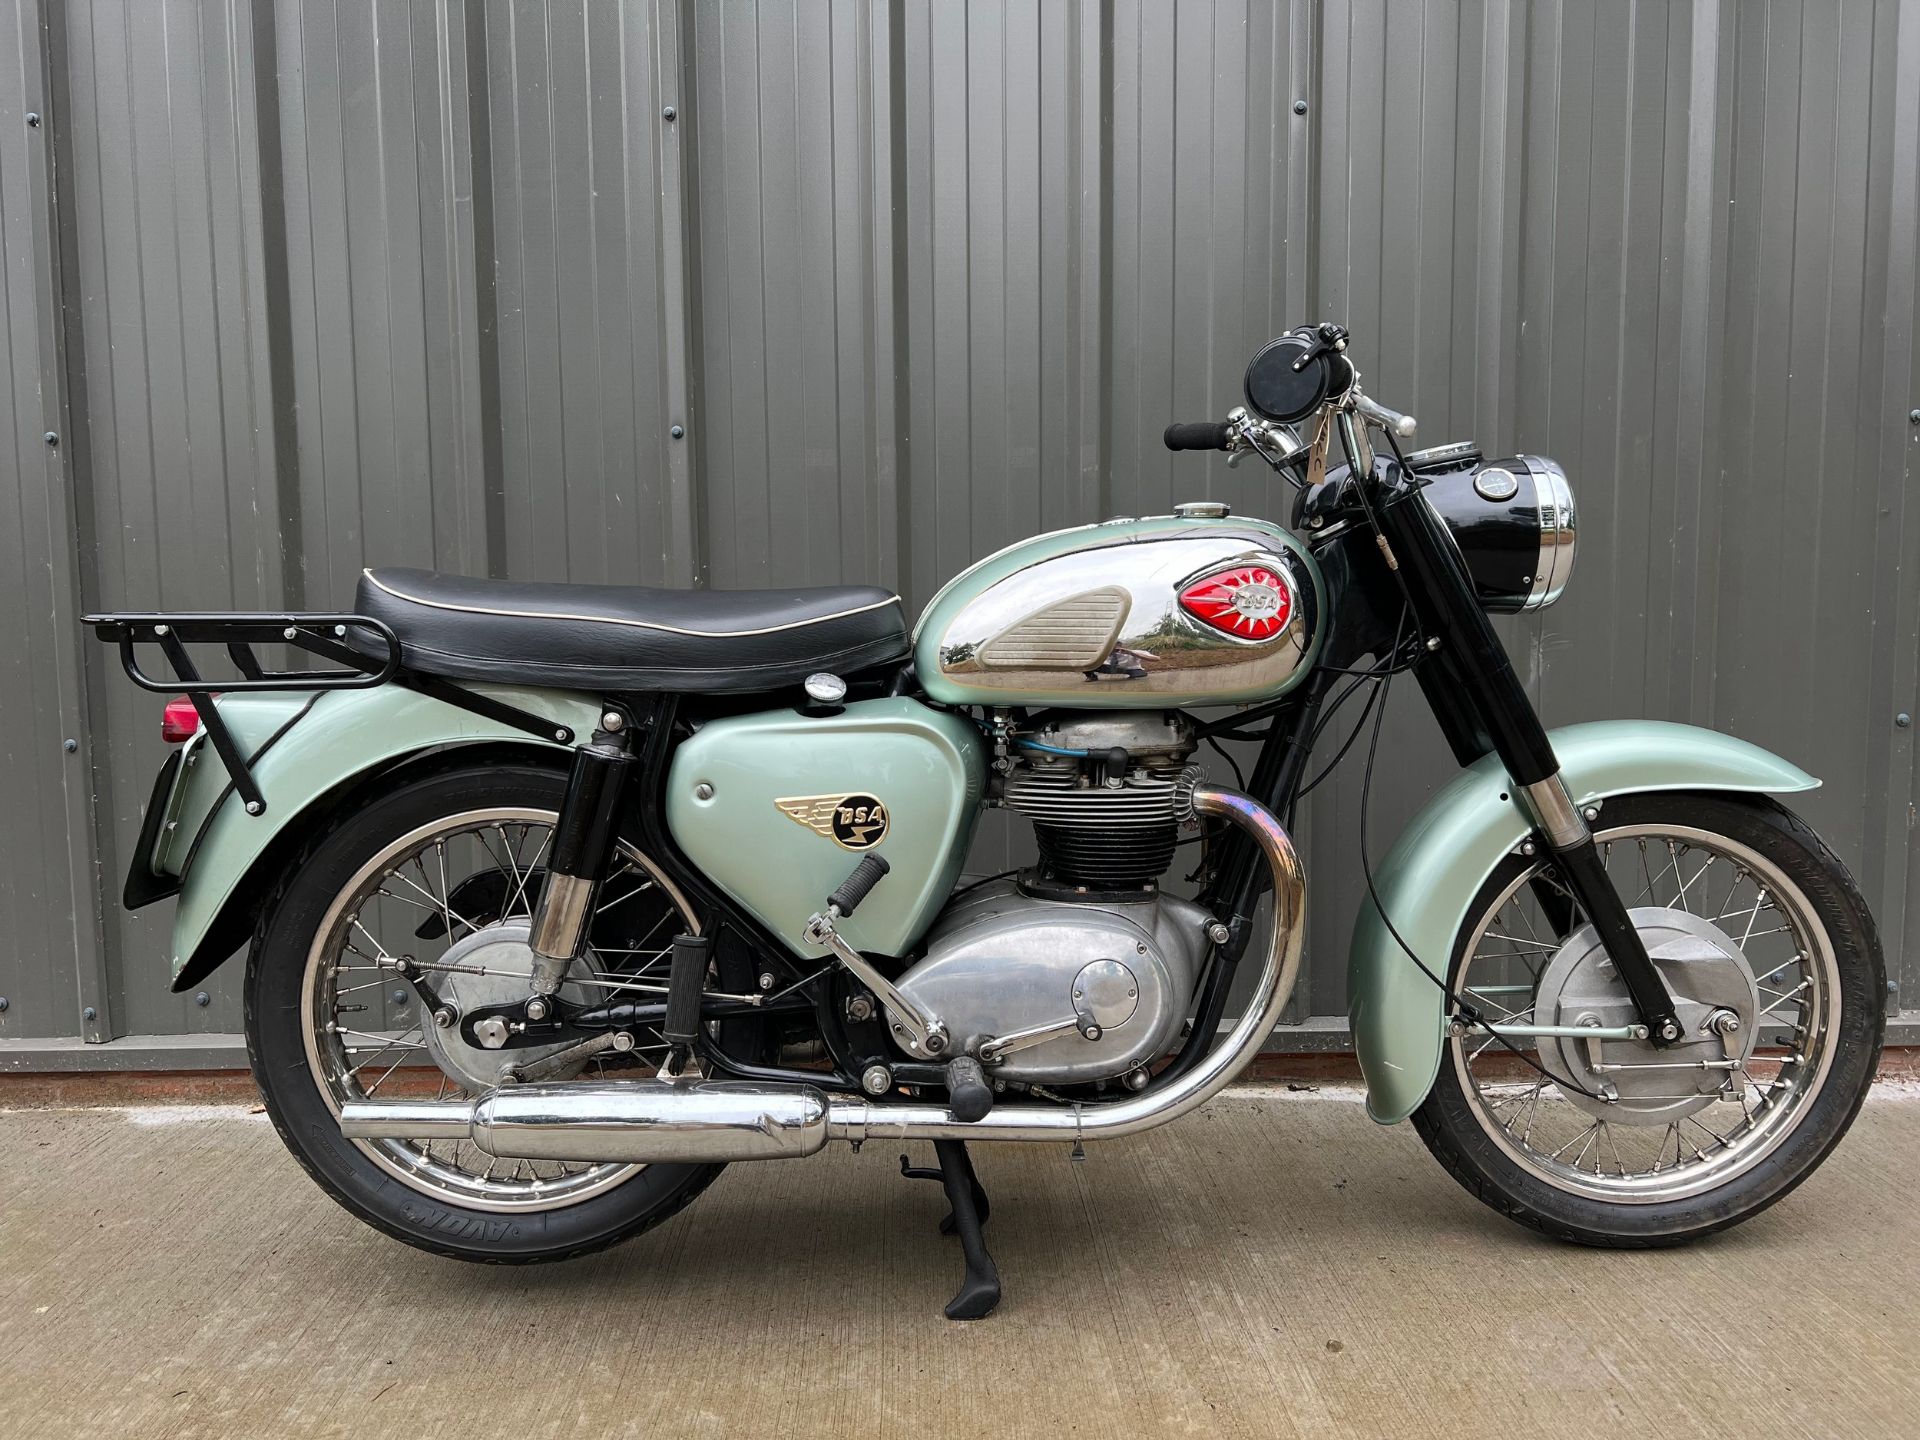 BSA A50 motorcycle. 1963. 500cc. Frame no. A504045 Engine no. A501244 Runs. Comes with dating